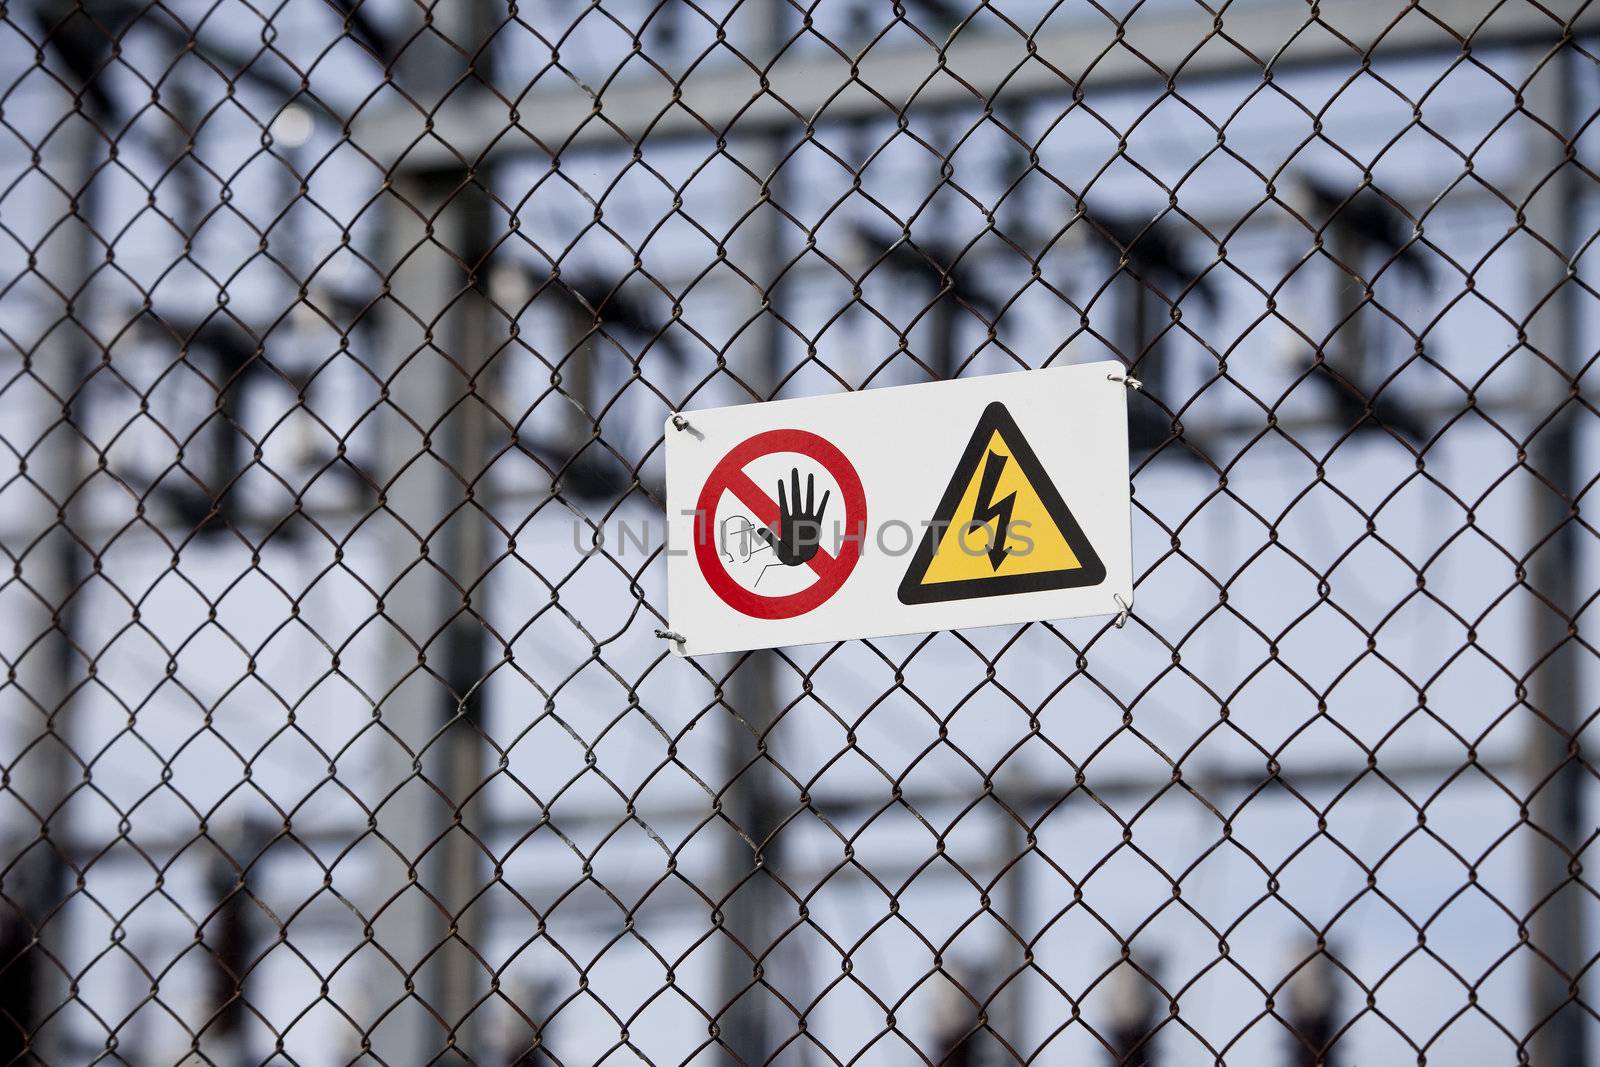 Warning signs on a fence with short focal depth.